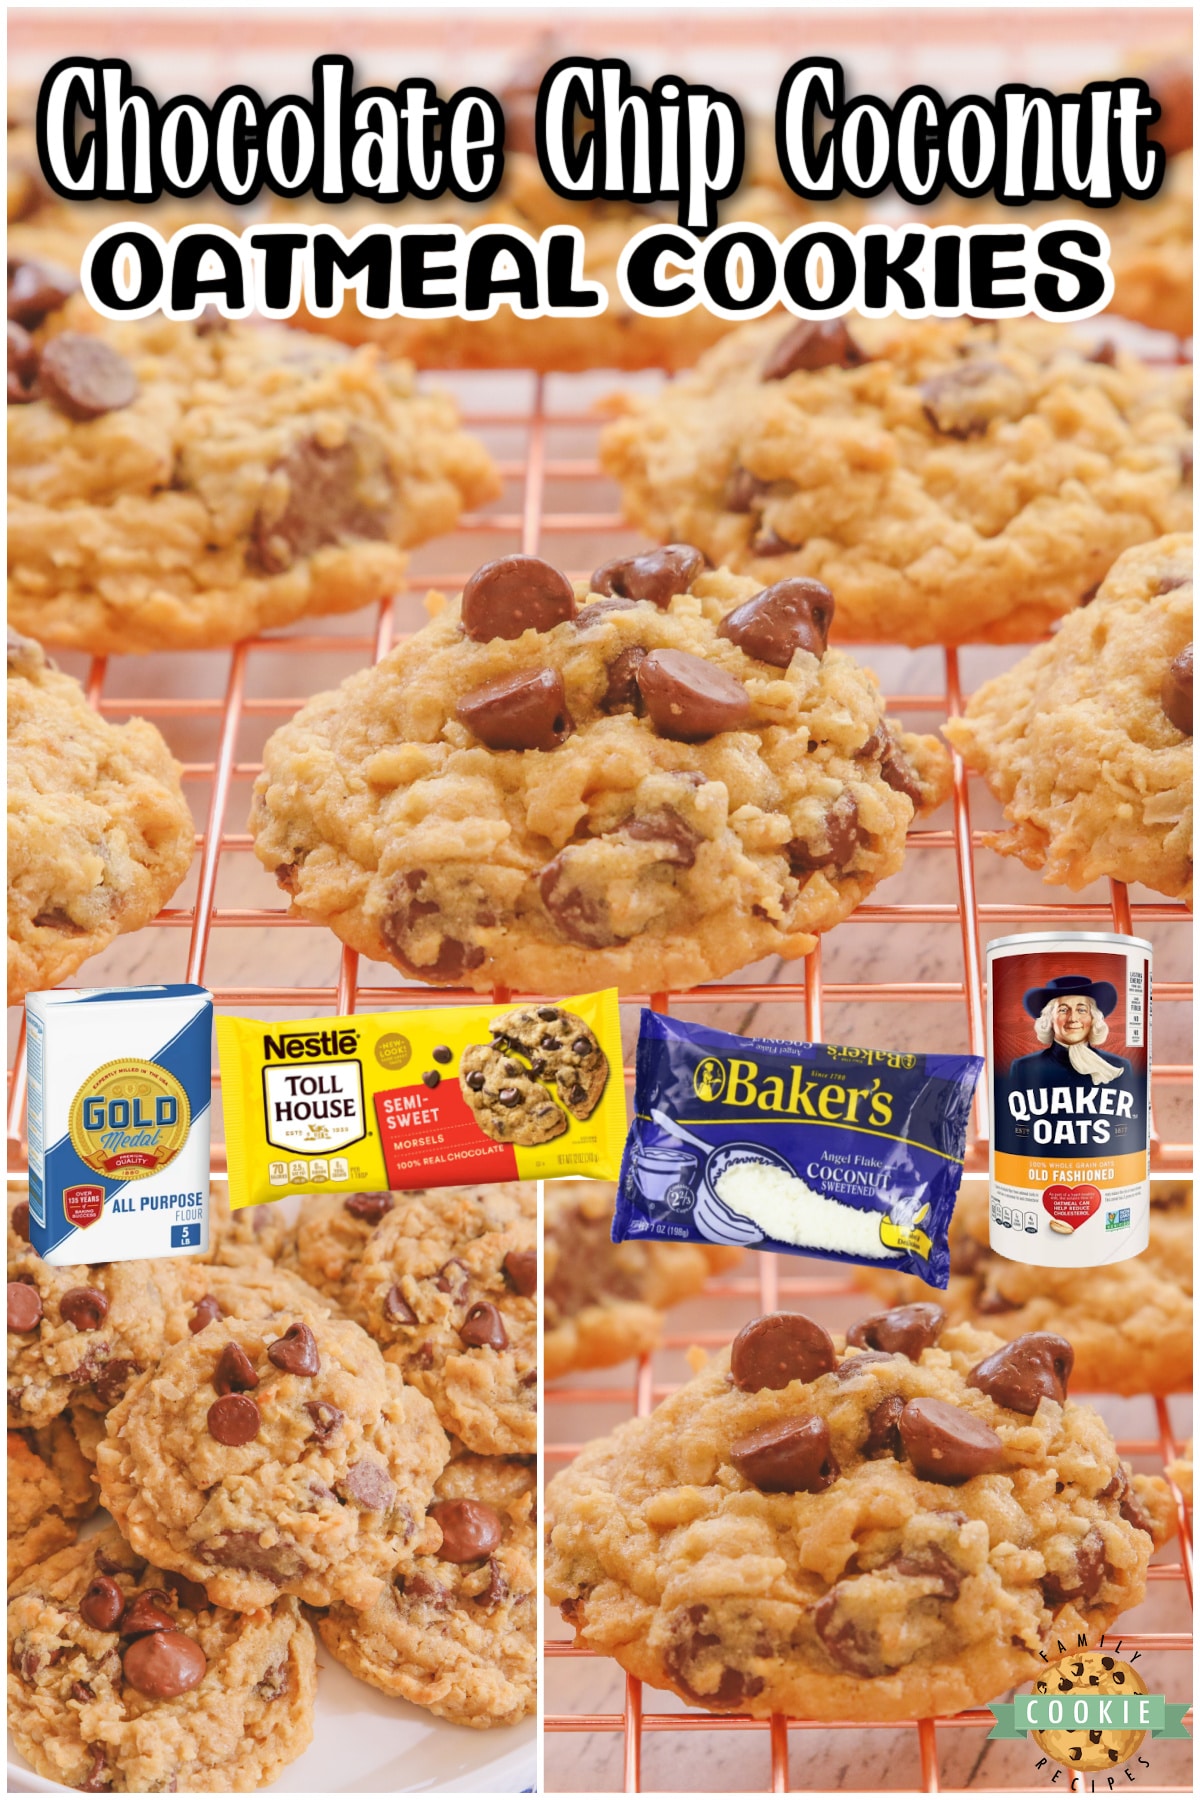 Chocolate Chip Coconut Oatmeal Cookies are packed with sweet coconut flakes, chocolate chips, and chewy oatmeal in every bite! These oatmeal chocolate chip cookies are so delicious, all the ingredients combined create a spectacular cookie like no other. 